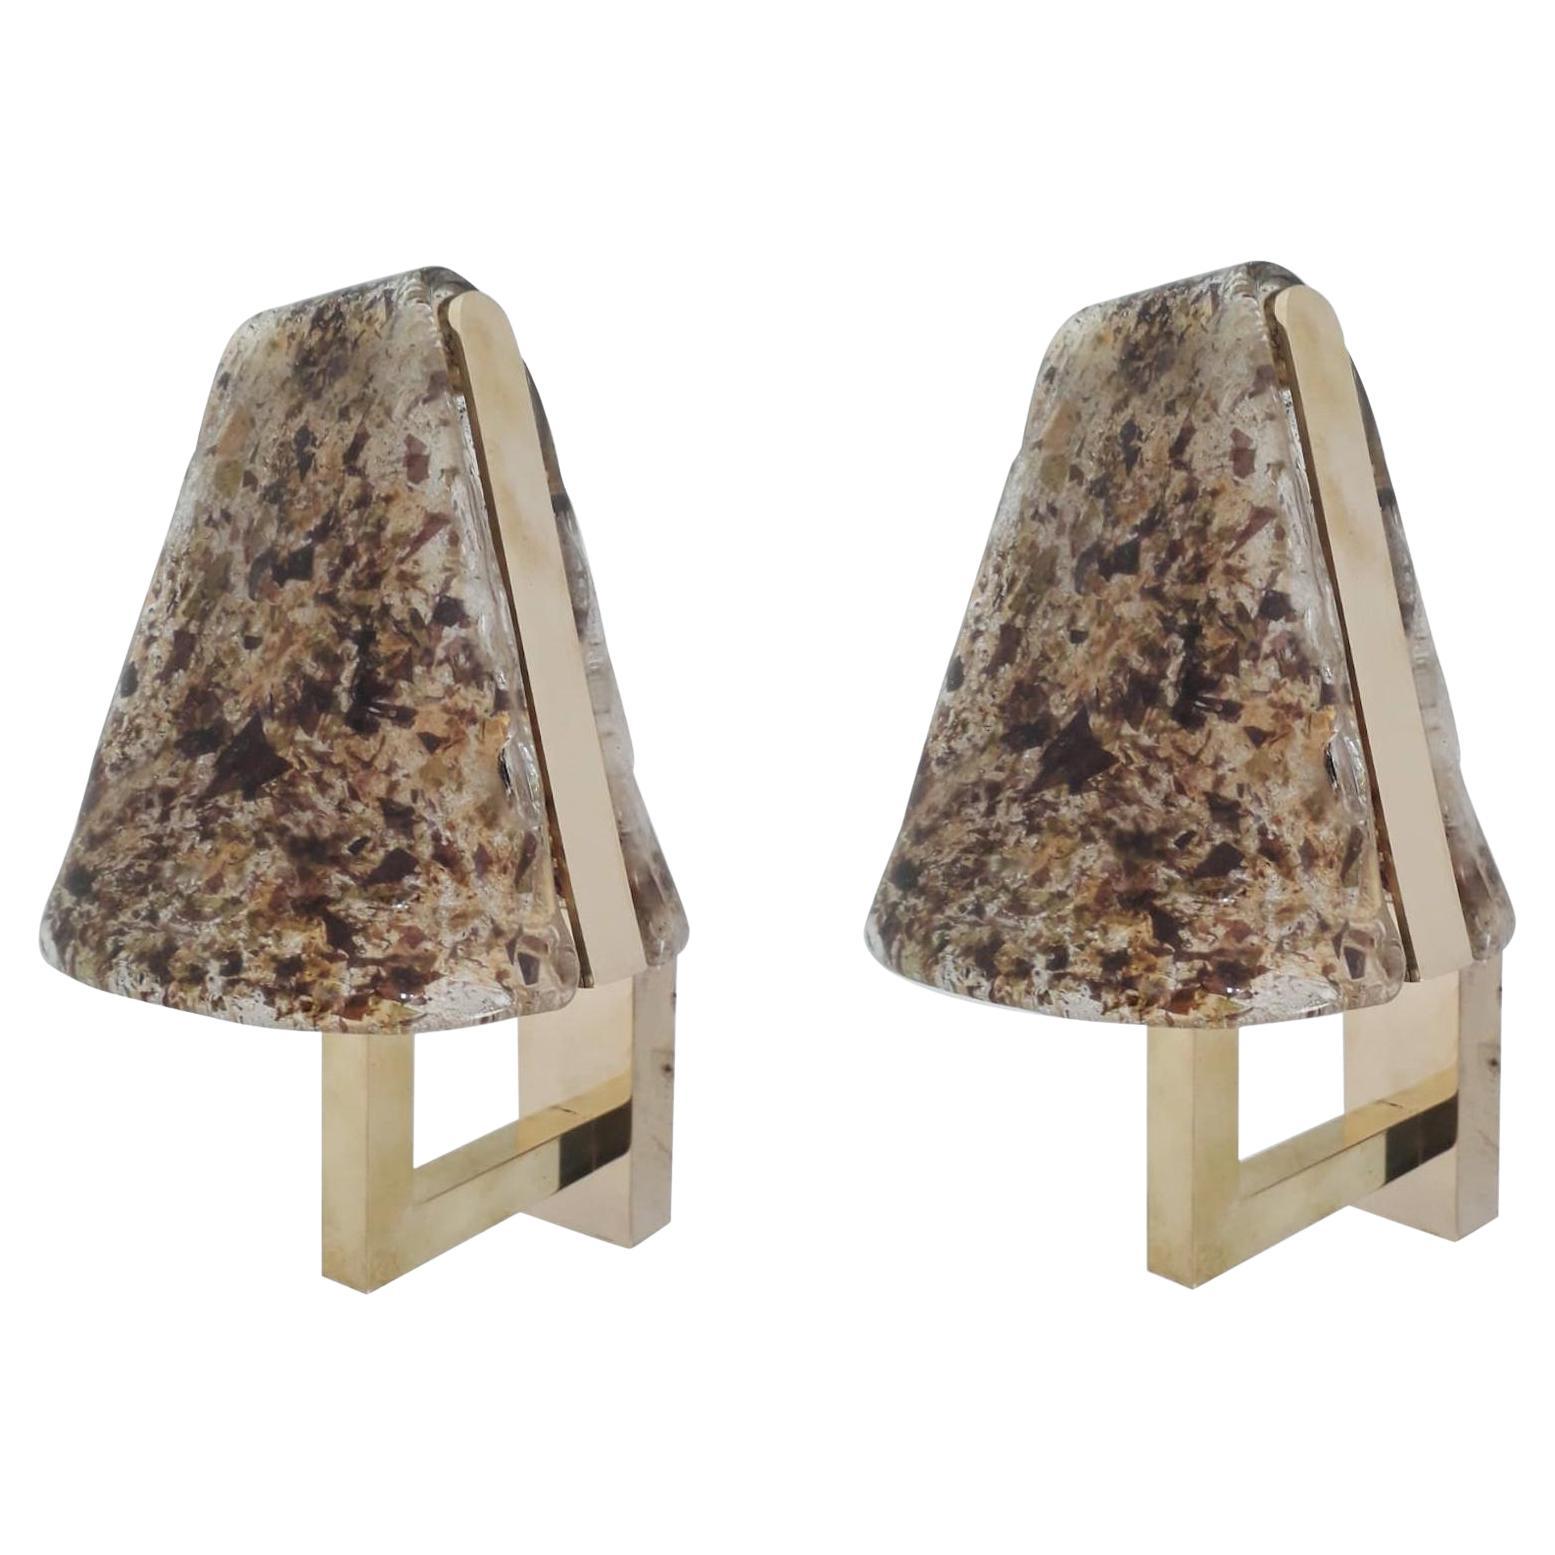 Pair of Bell Shade Sconces by Mazzega - 3 pairs available For Sale